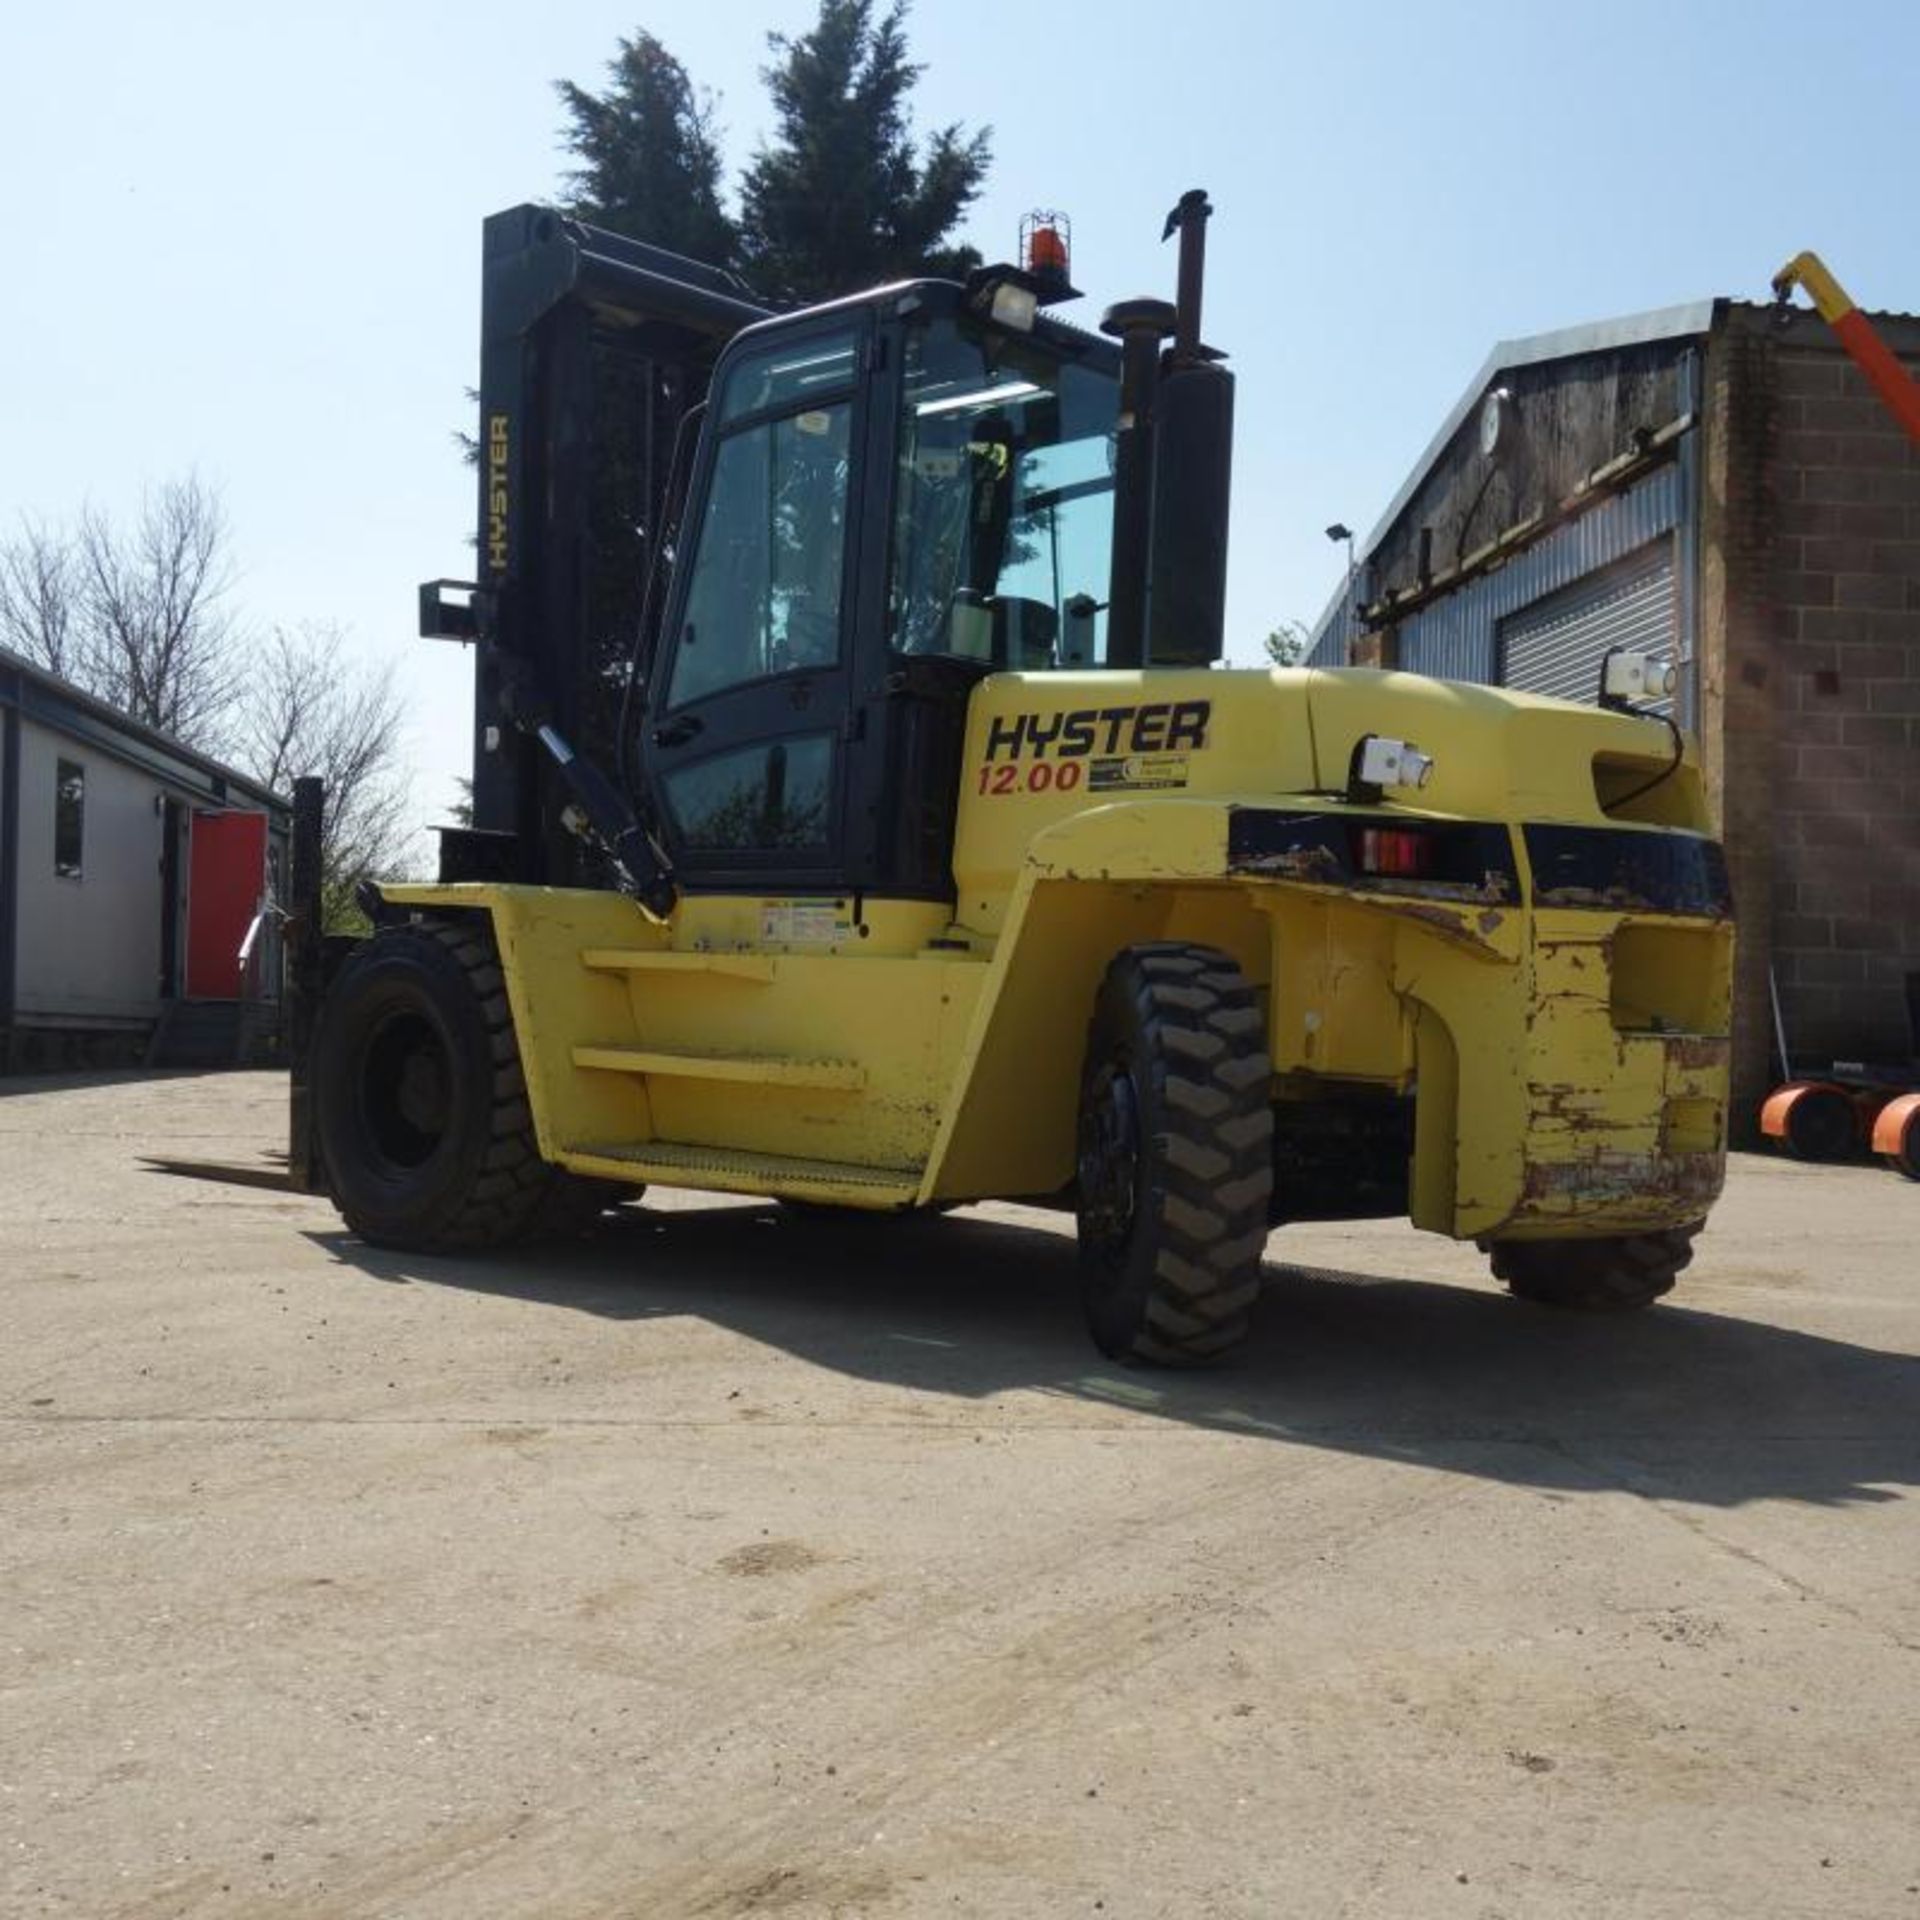 2006 Hyster M12.00xm 12 Ton Forklift, 8151 Hours From New